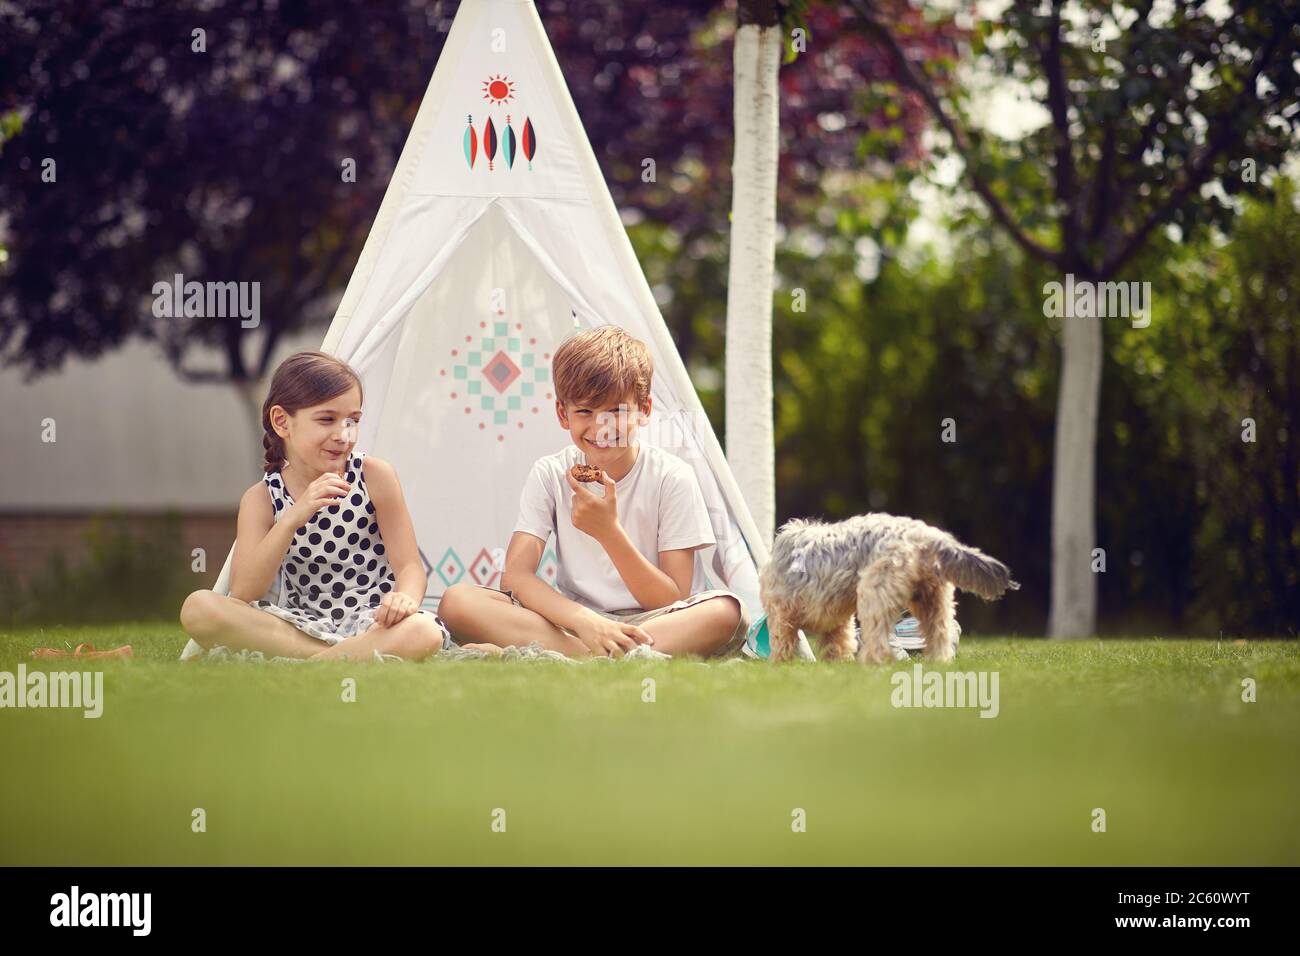 Summer time fun. Smiling children playing at backyard in teepee and eats cookies. Stock Photo